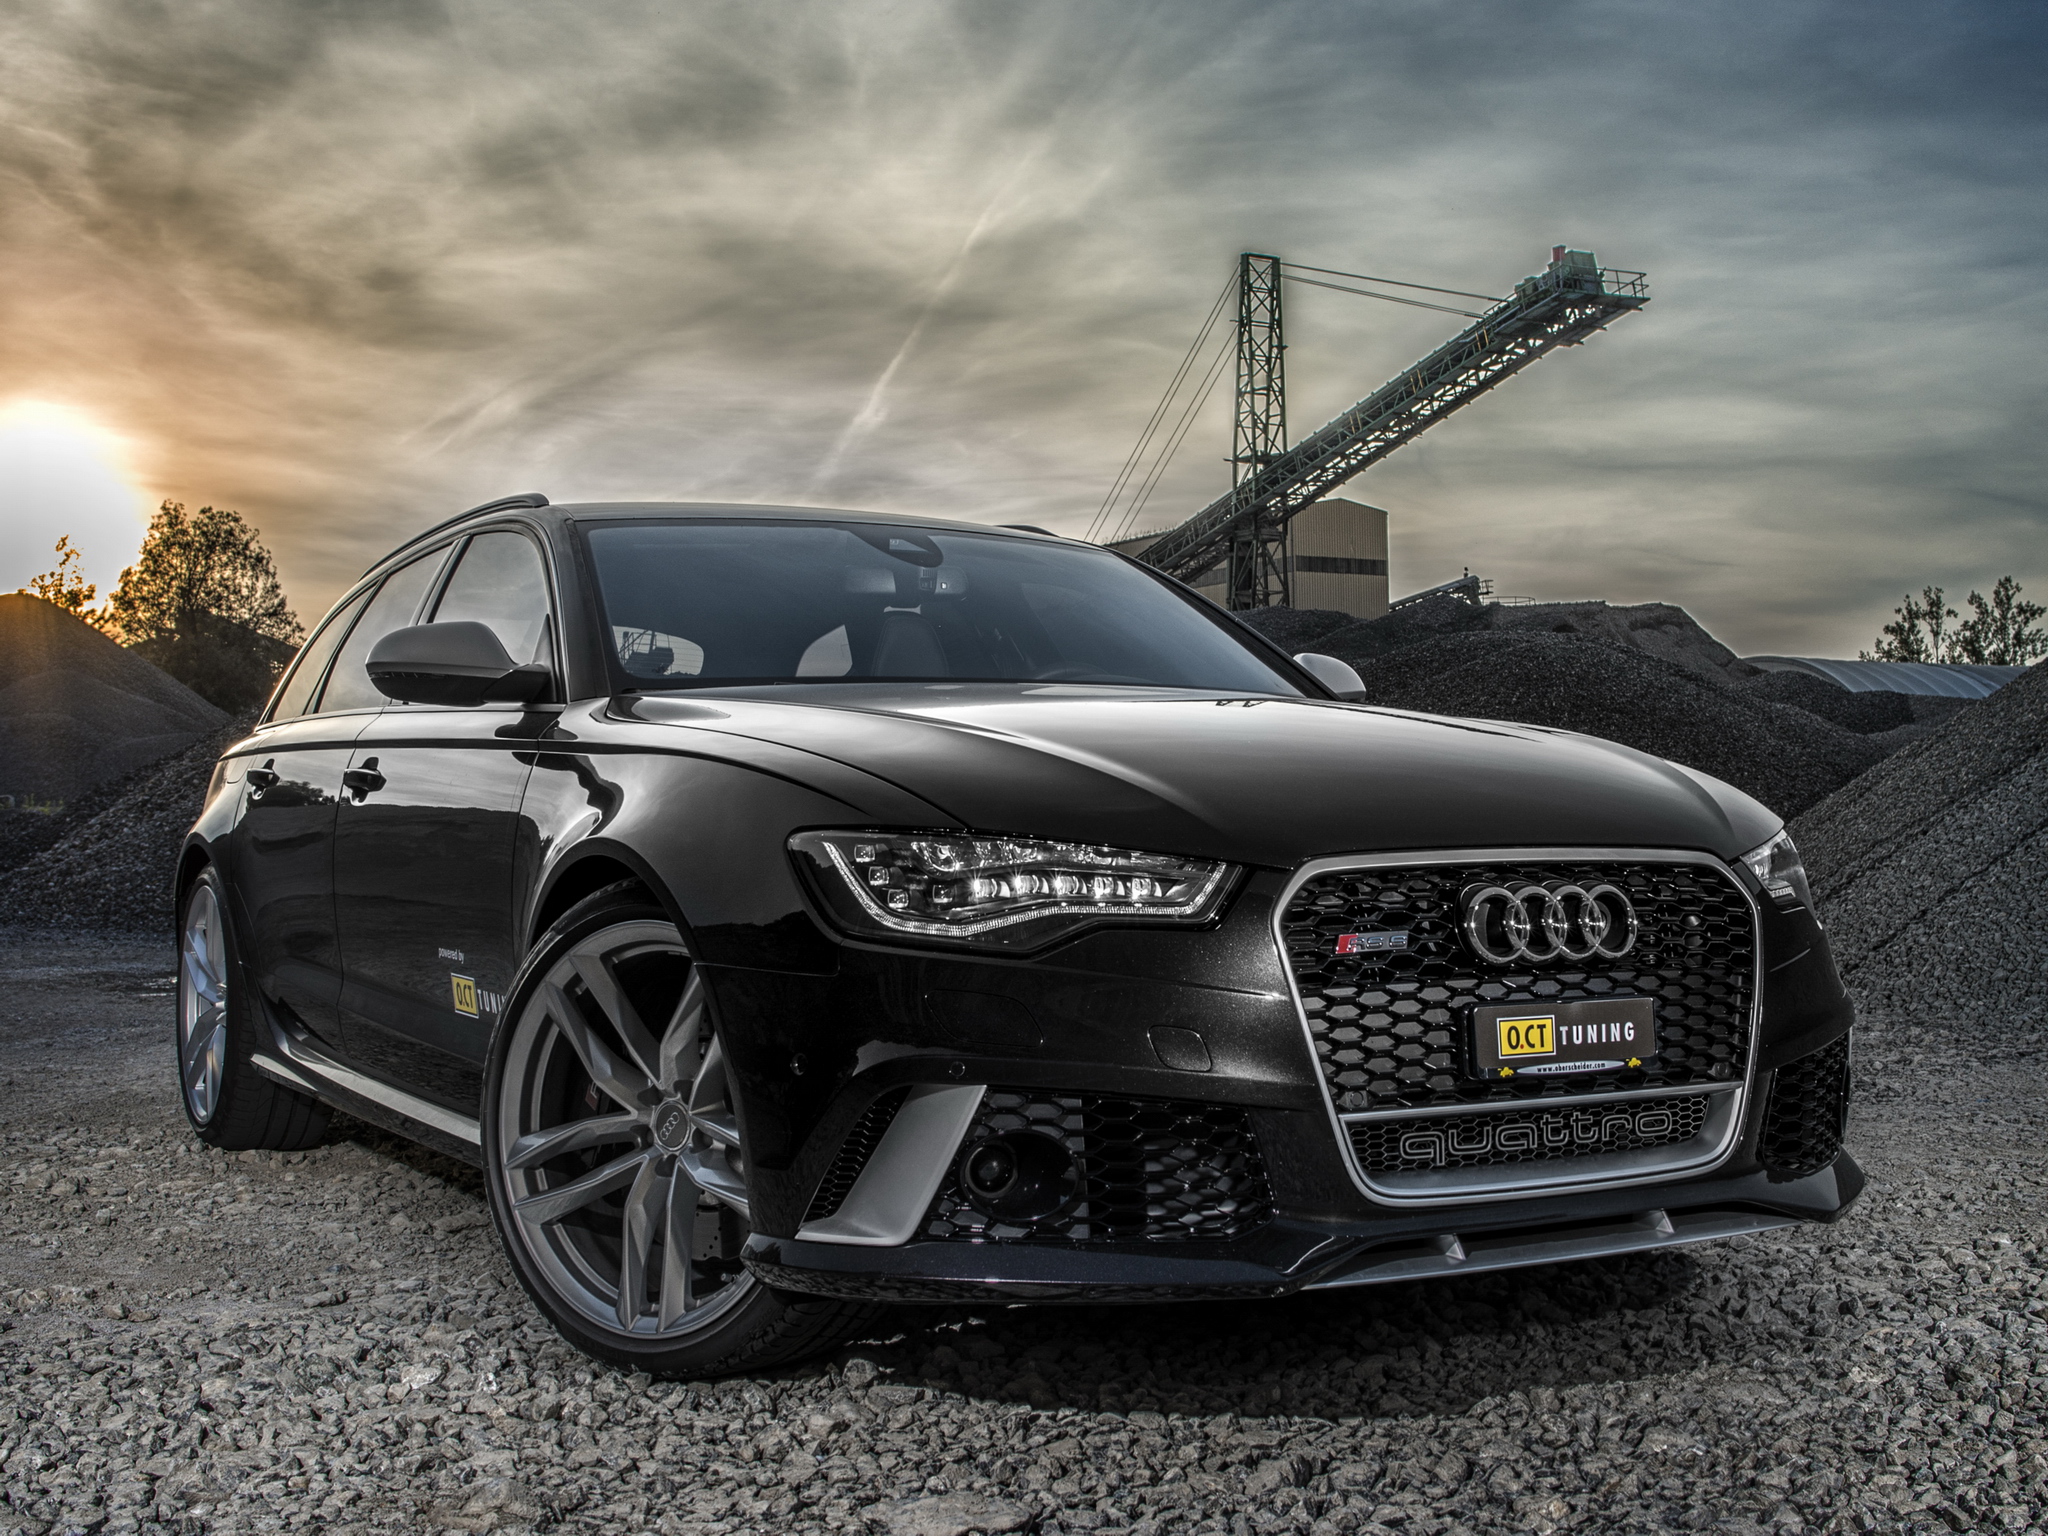 2013 Oct Tuning Audi Rs6 Avant 4gc7 Tuning Stationwagon Wallpapers Hd Desktop And Mobile Backgrounds